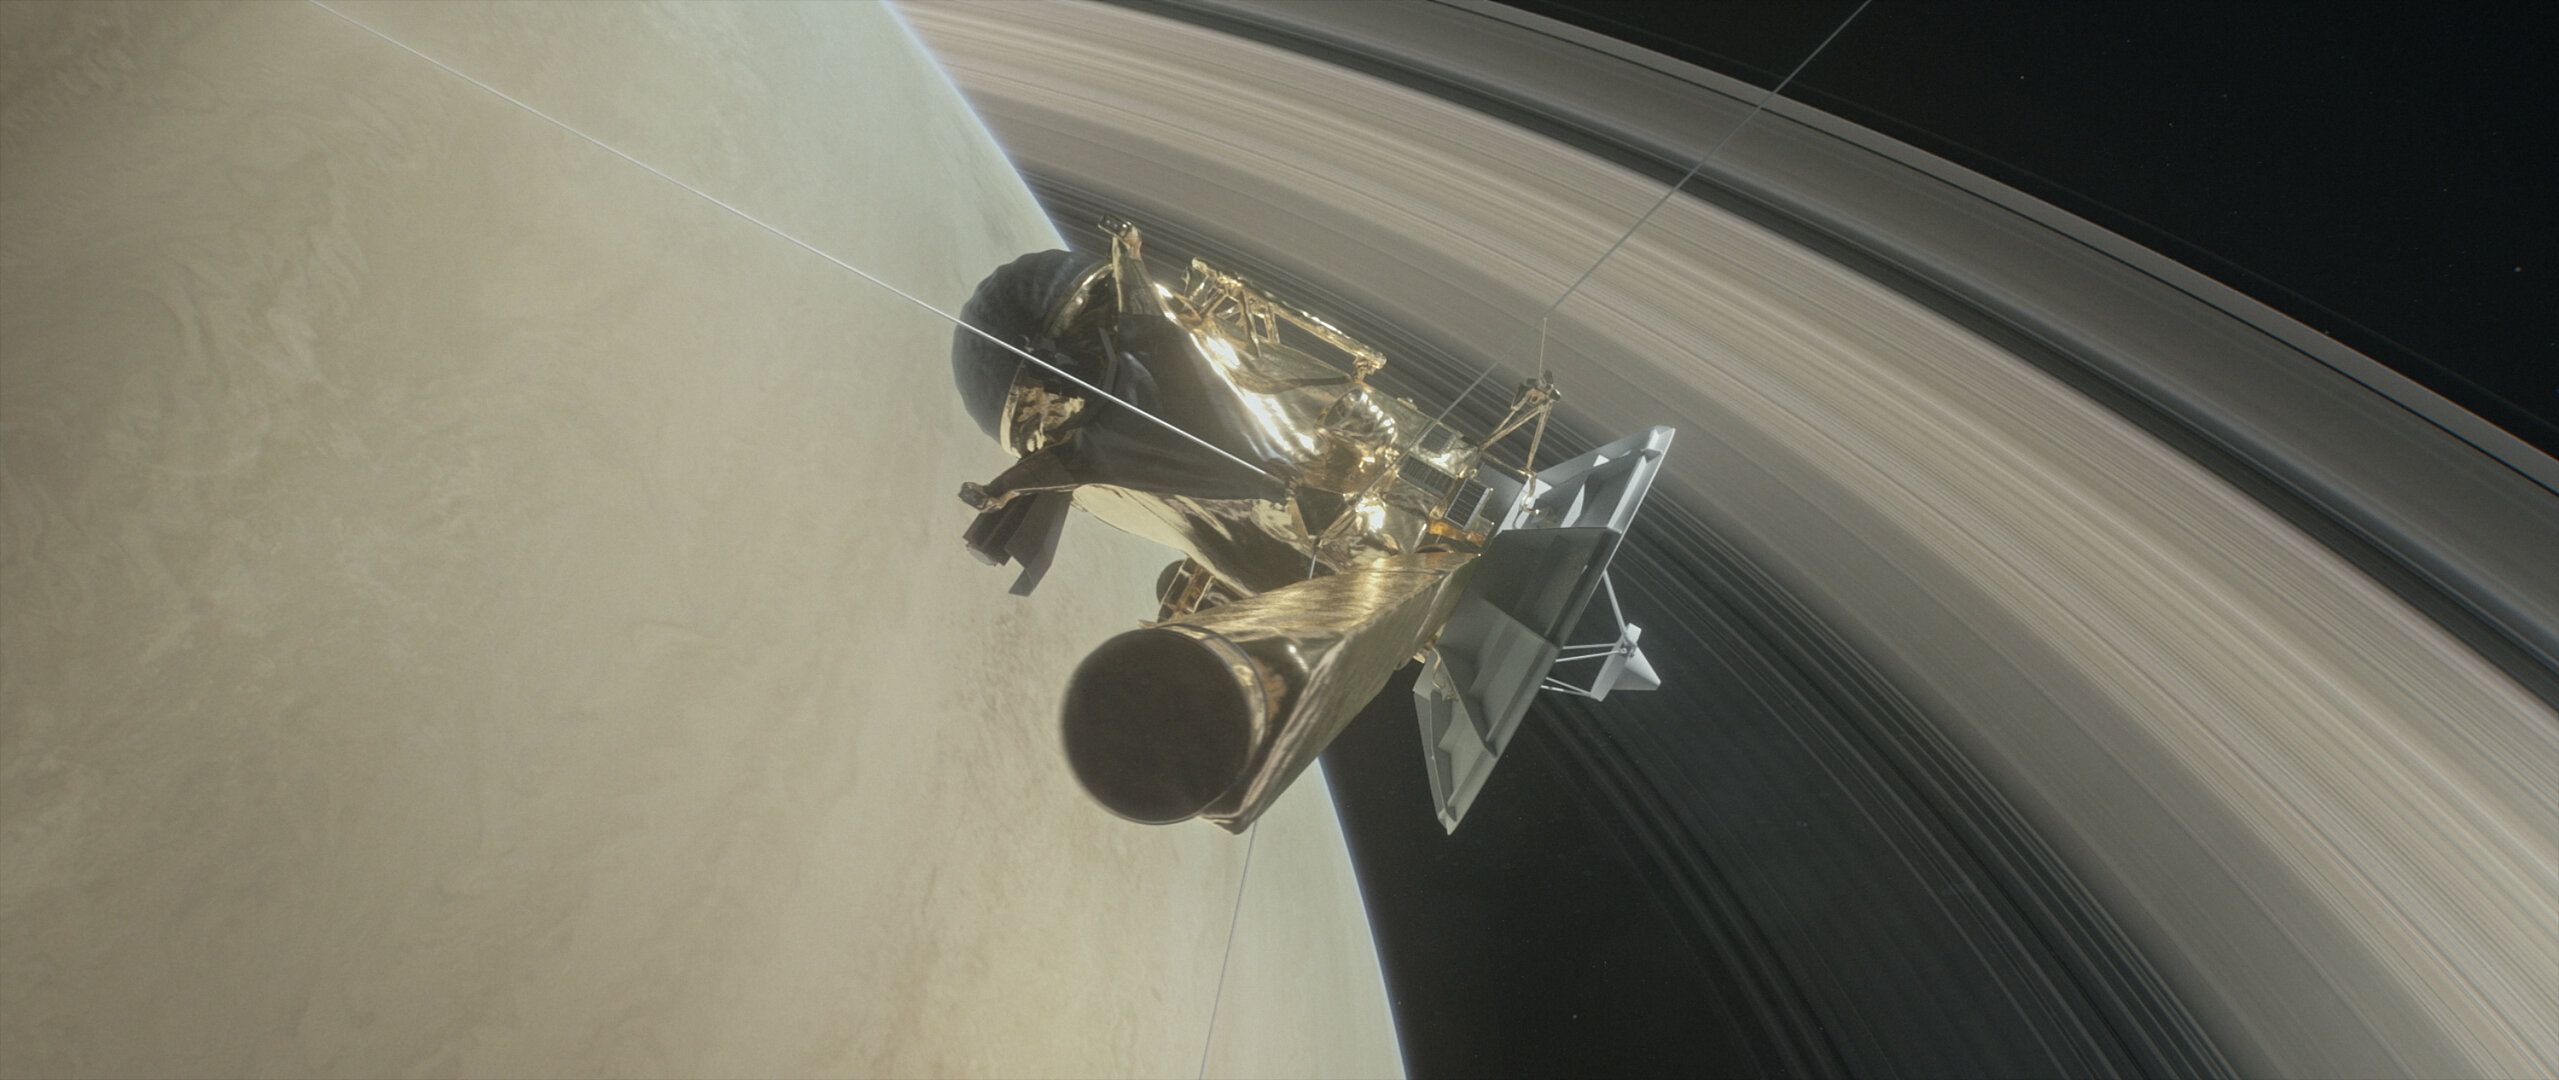 Cassini will pass through unexplored areas between the planet Saturn and its rings